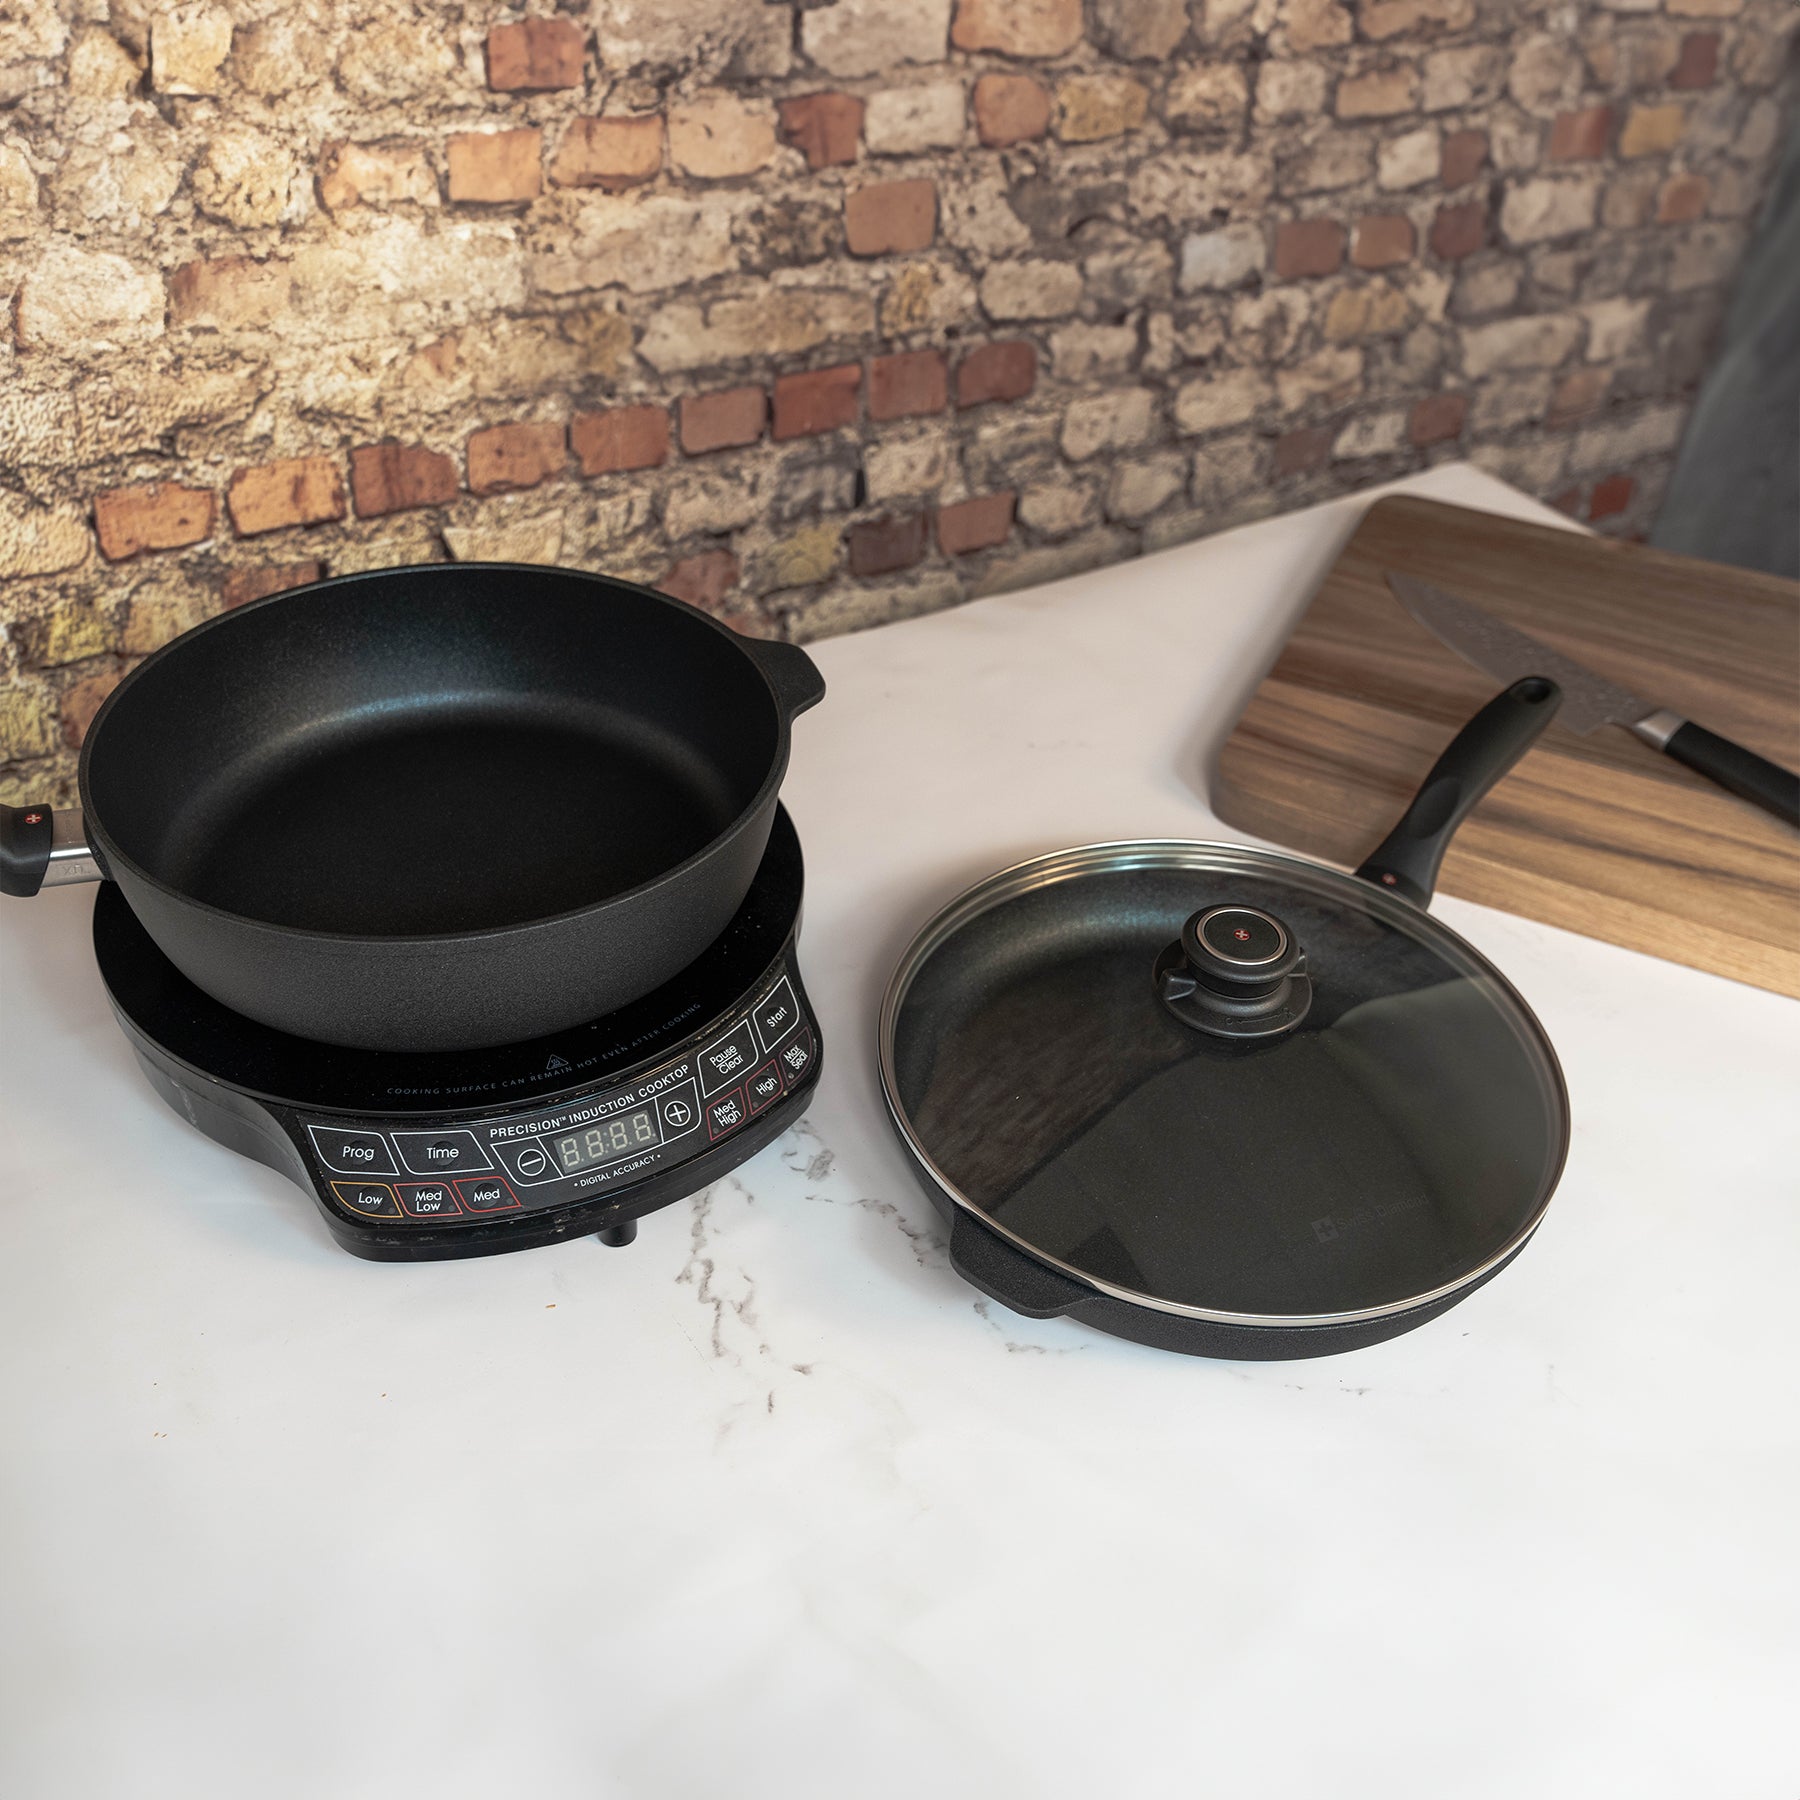 XD Nonstick 3-Piece Set - Fry Pan & Saute Pan - Induction on hot plate next to cutting board